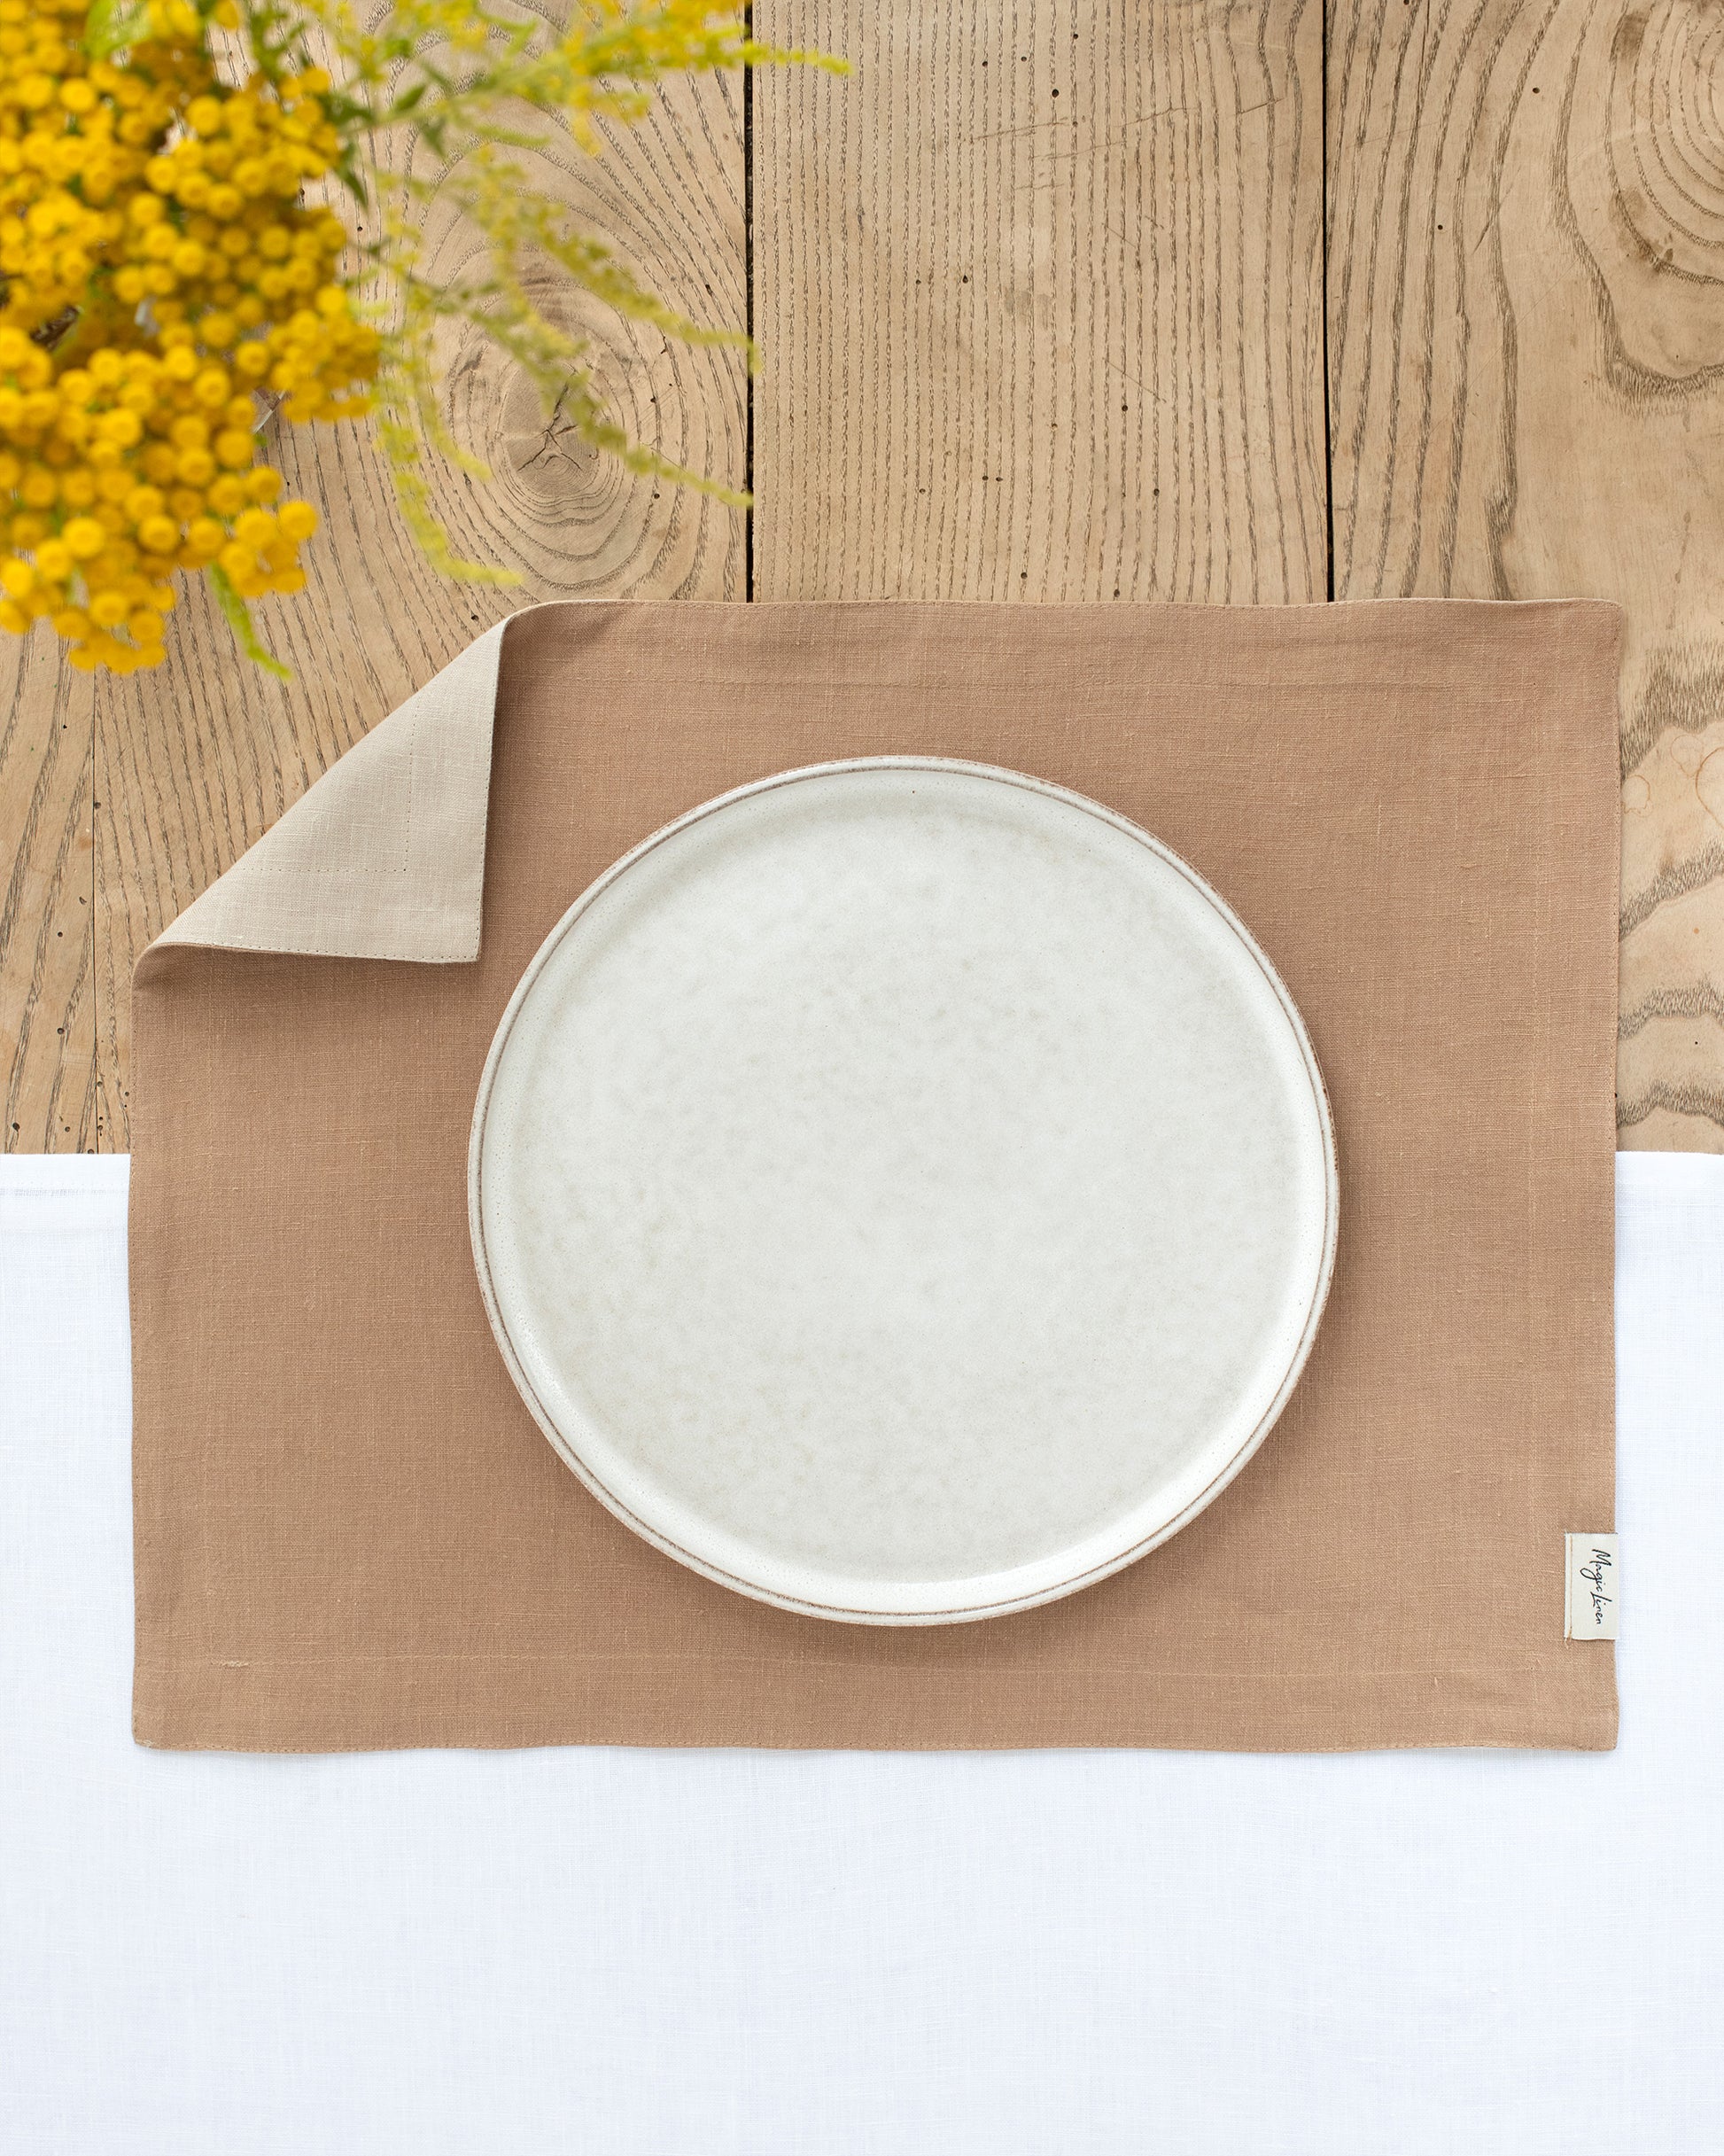 Double layer linen placemat set of 2 in Latte - MagicLinen